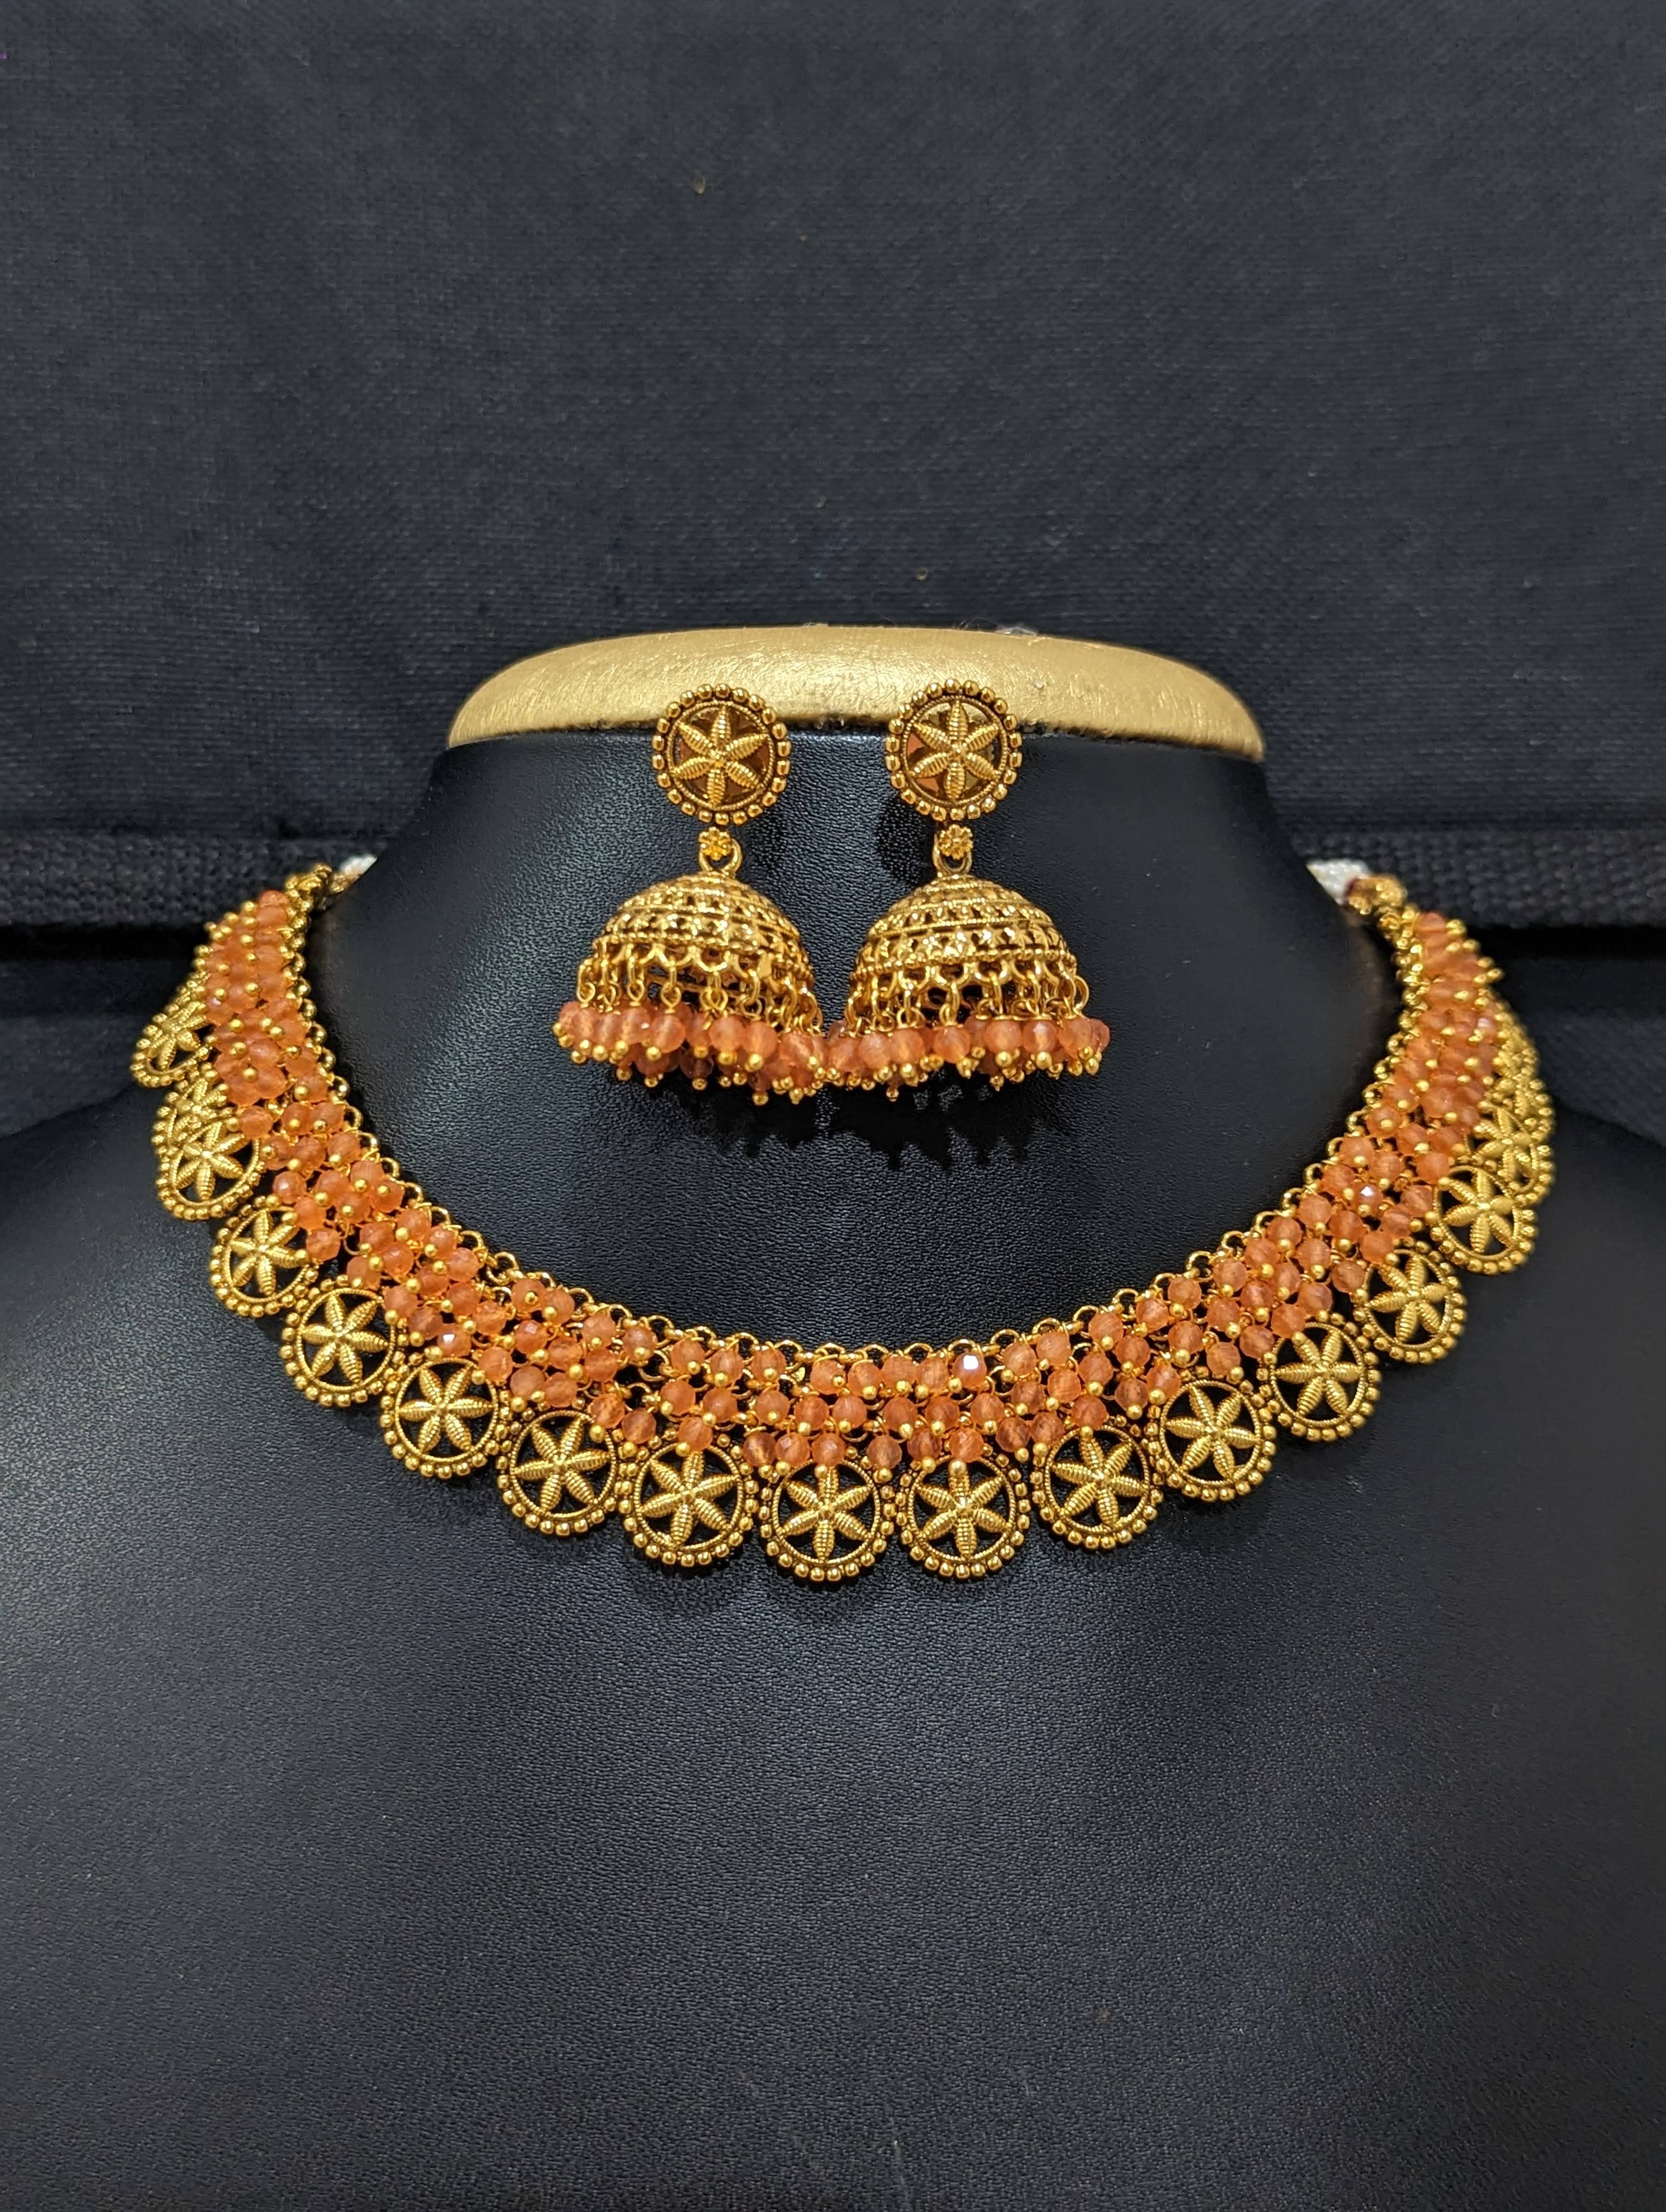 Magnificent Gold Necklace and Earrings Set